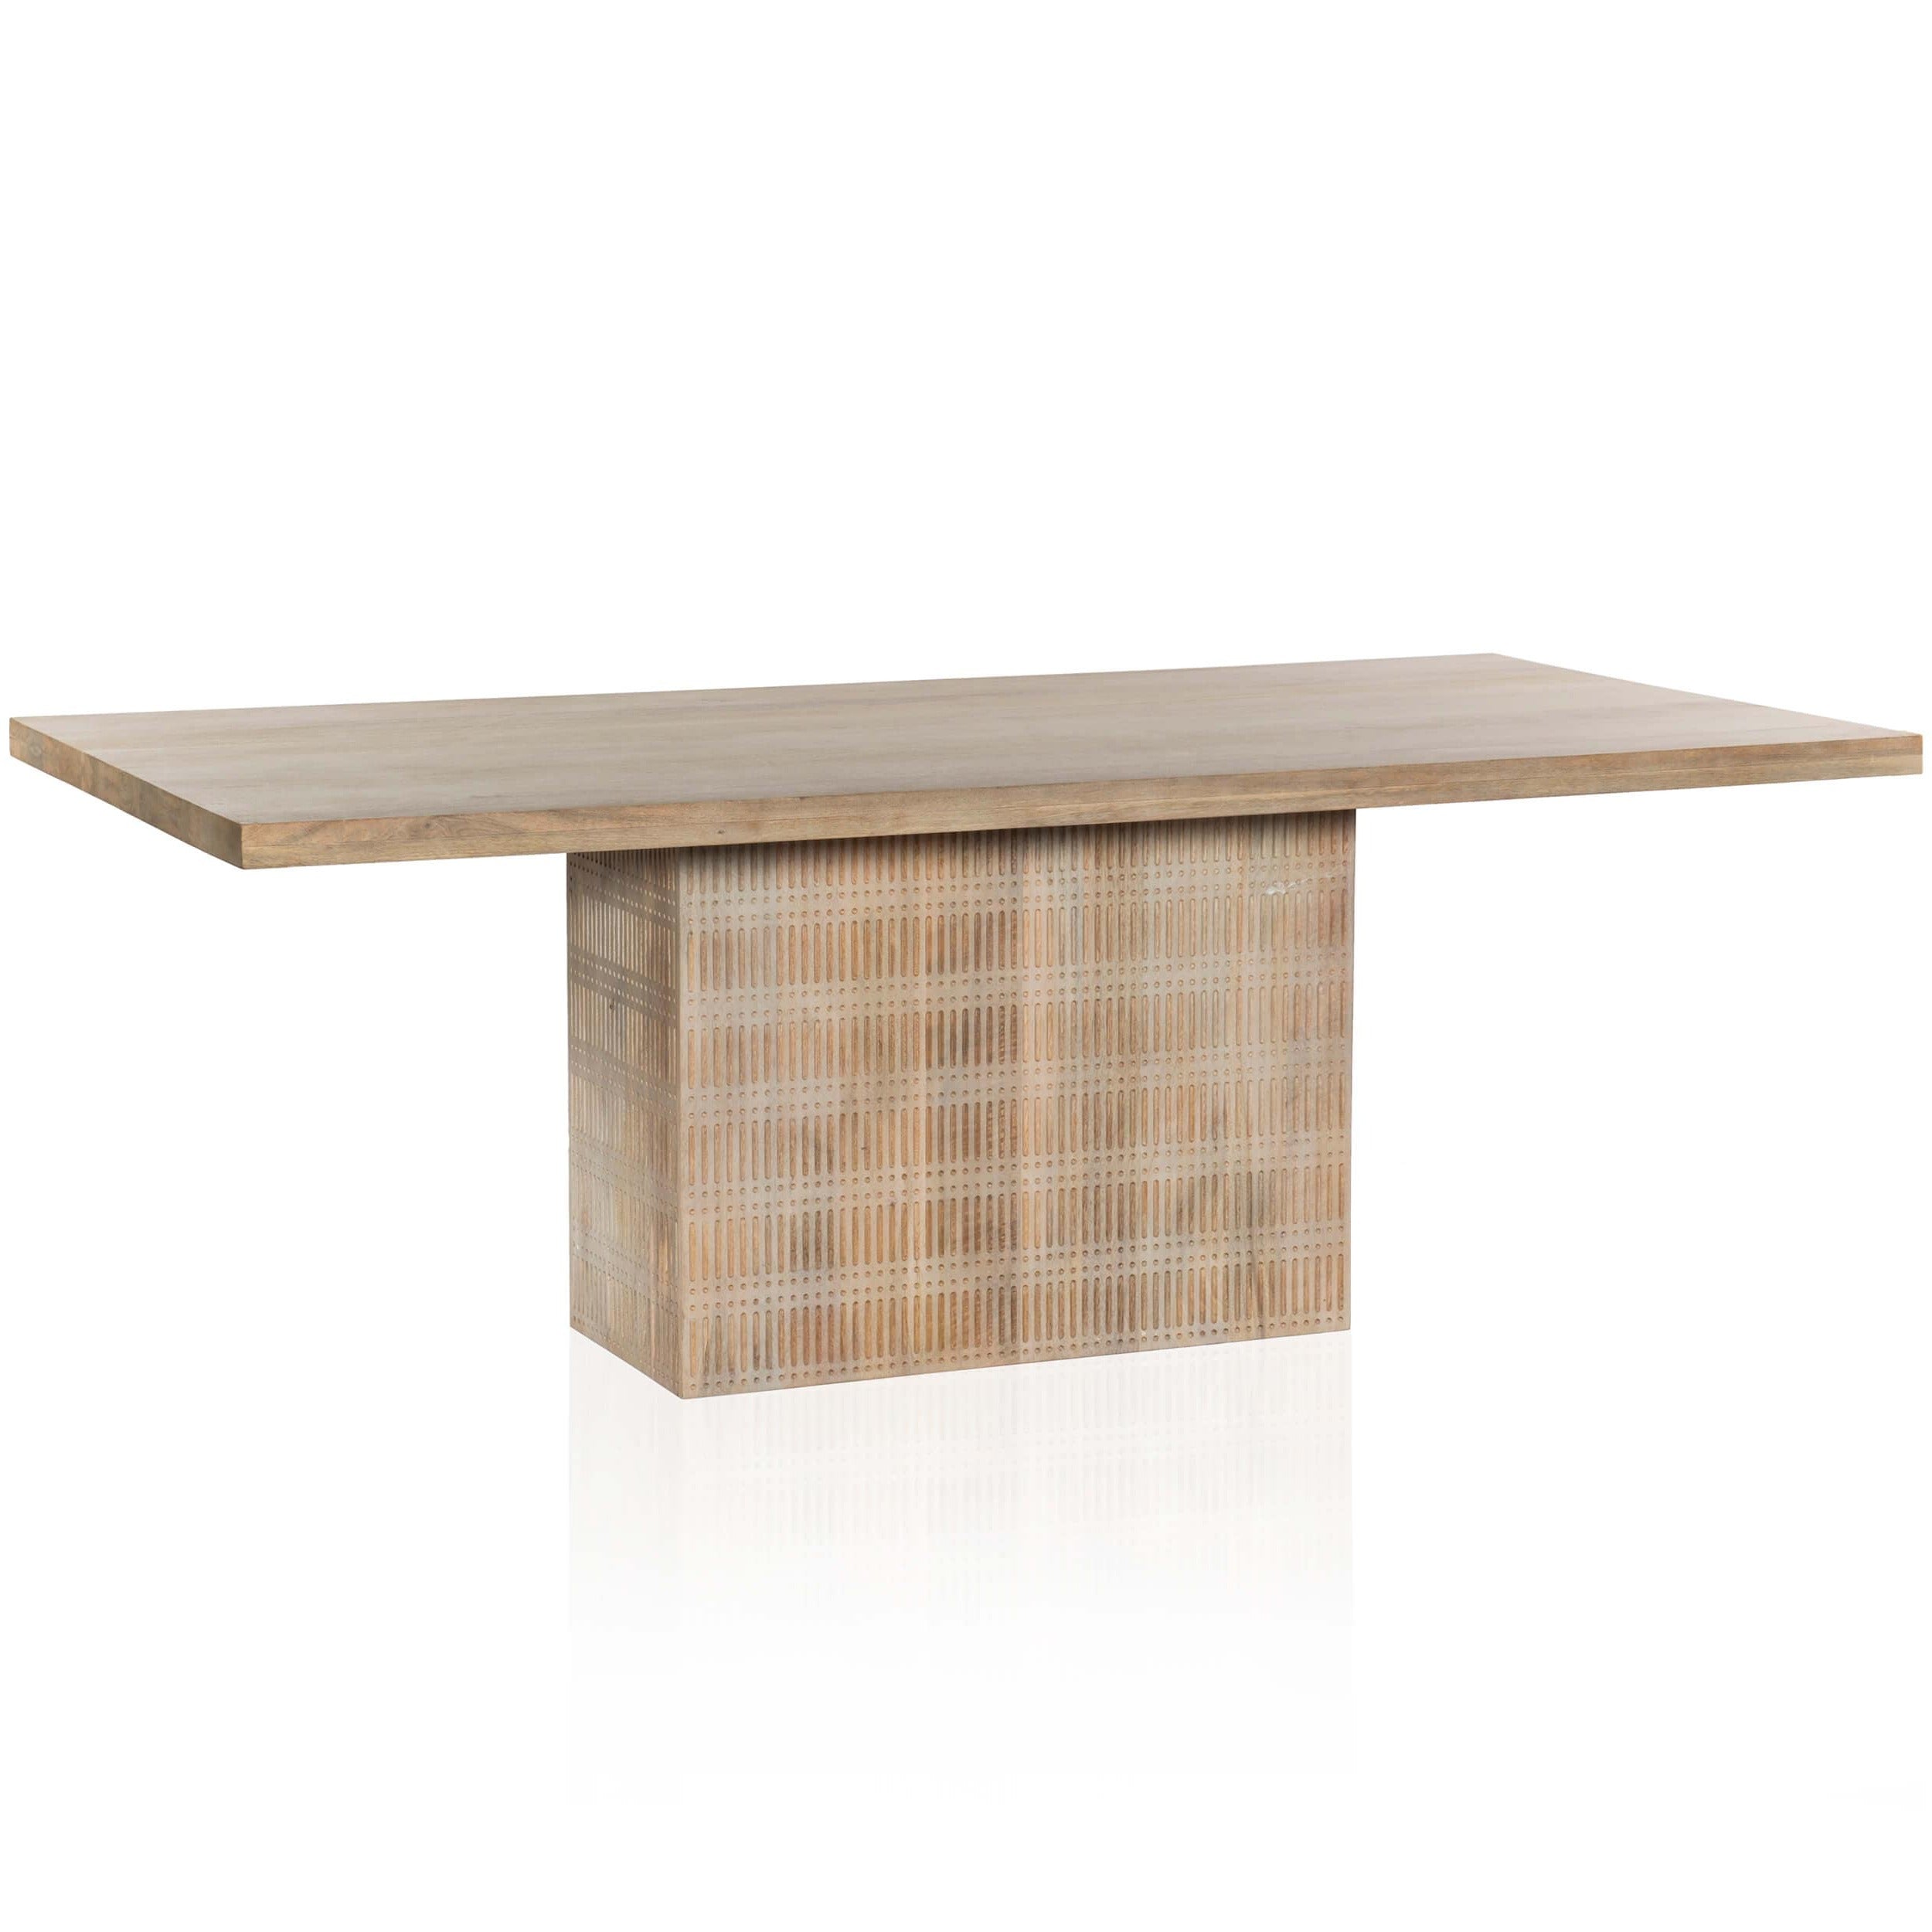 Image of Kelby Dining Table, Light Wash